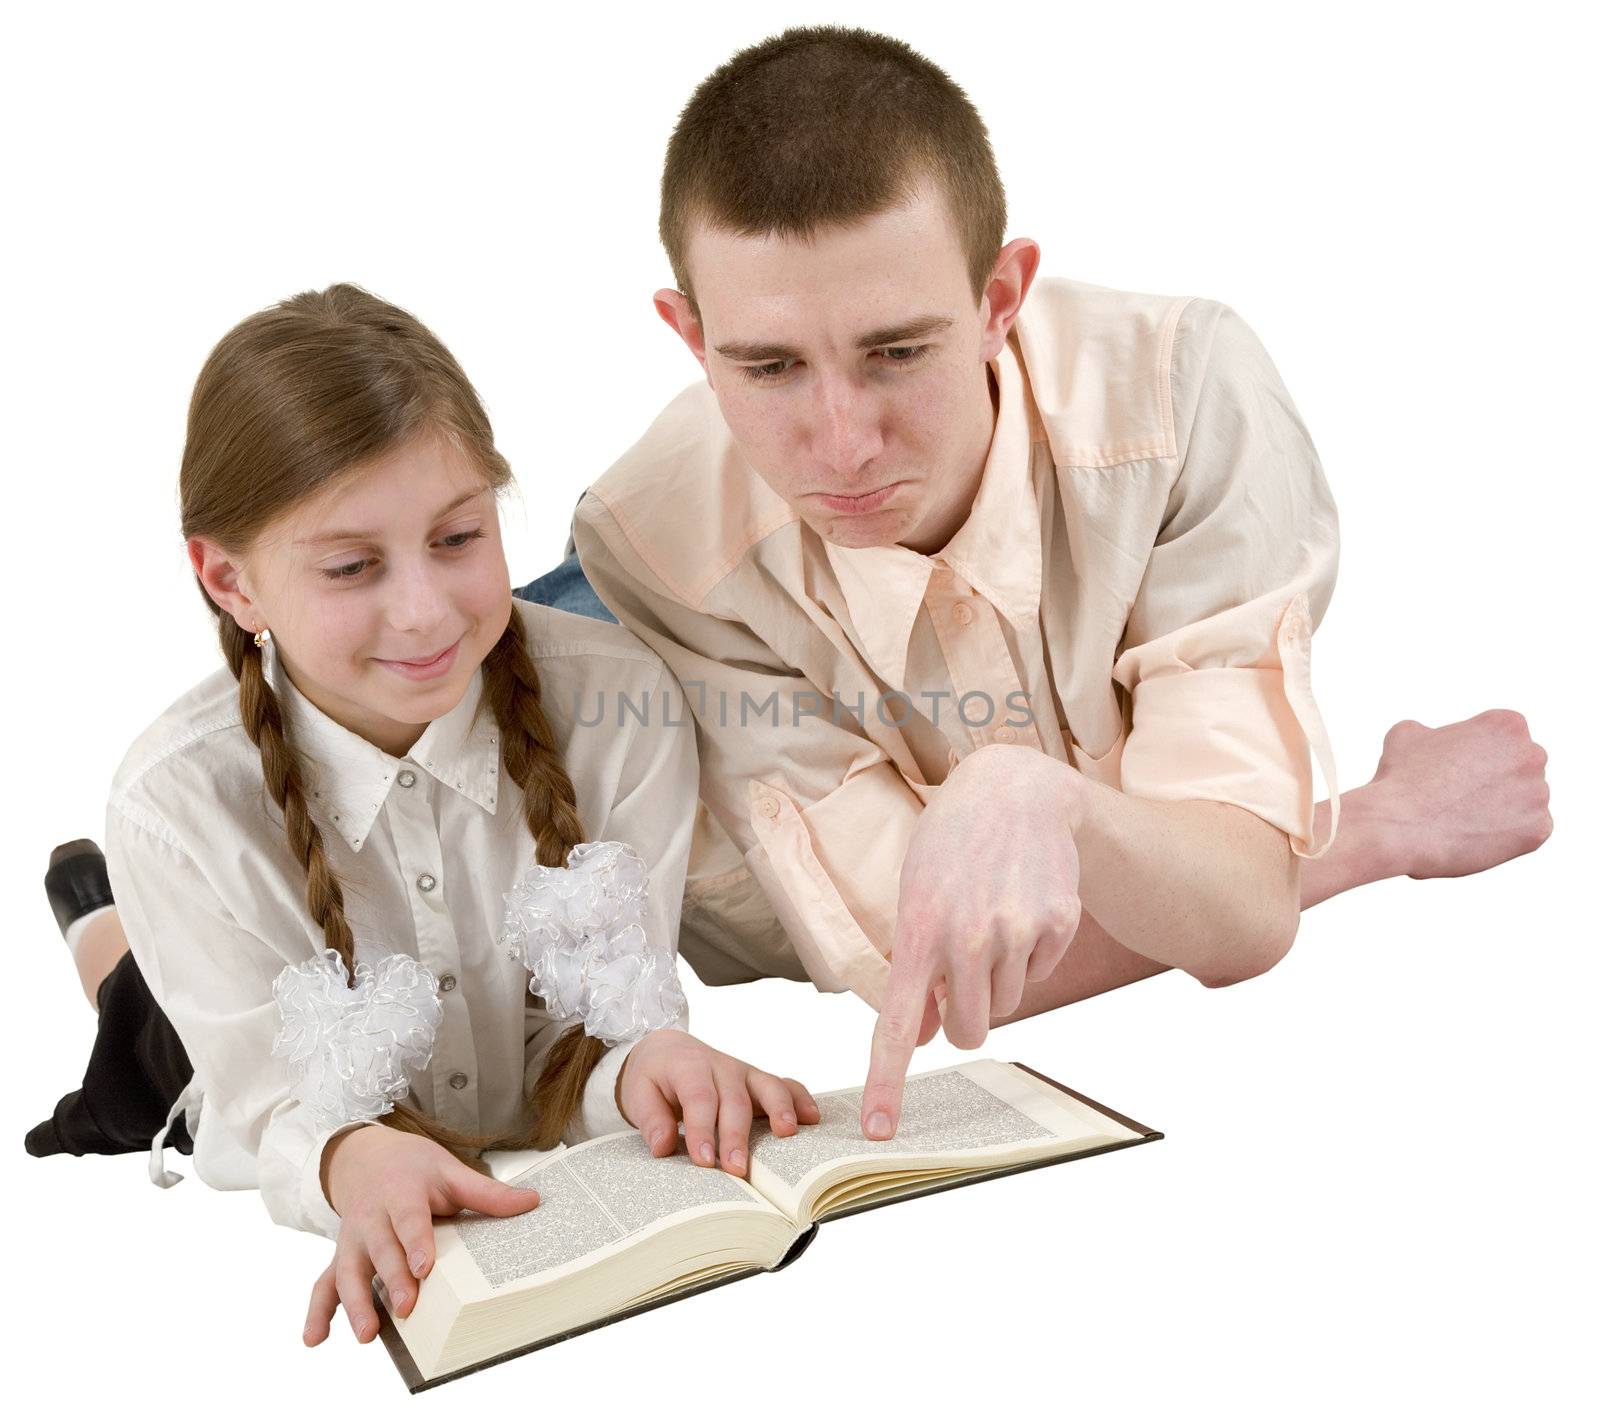 Young man and girl reading book by pzaxe